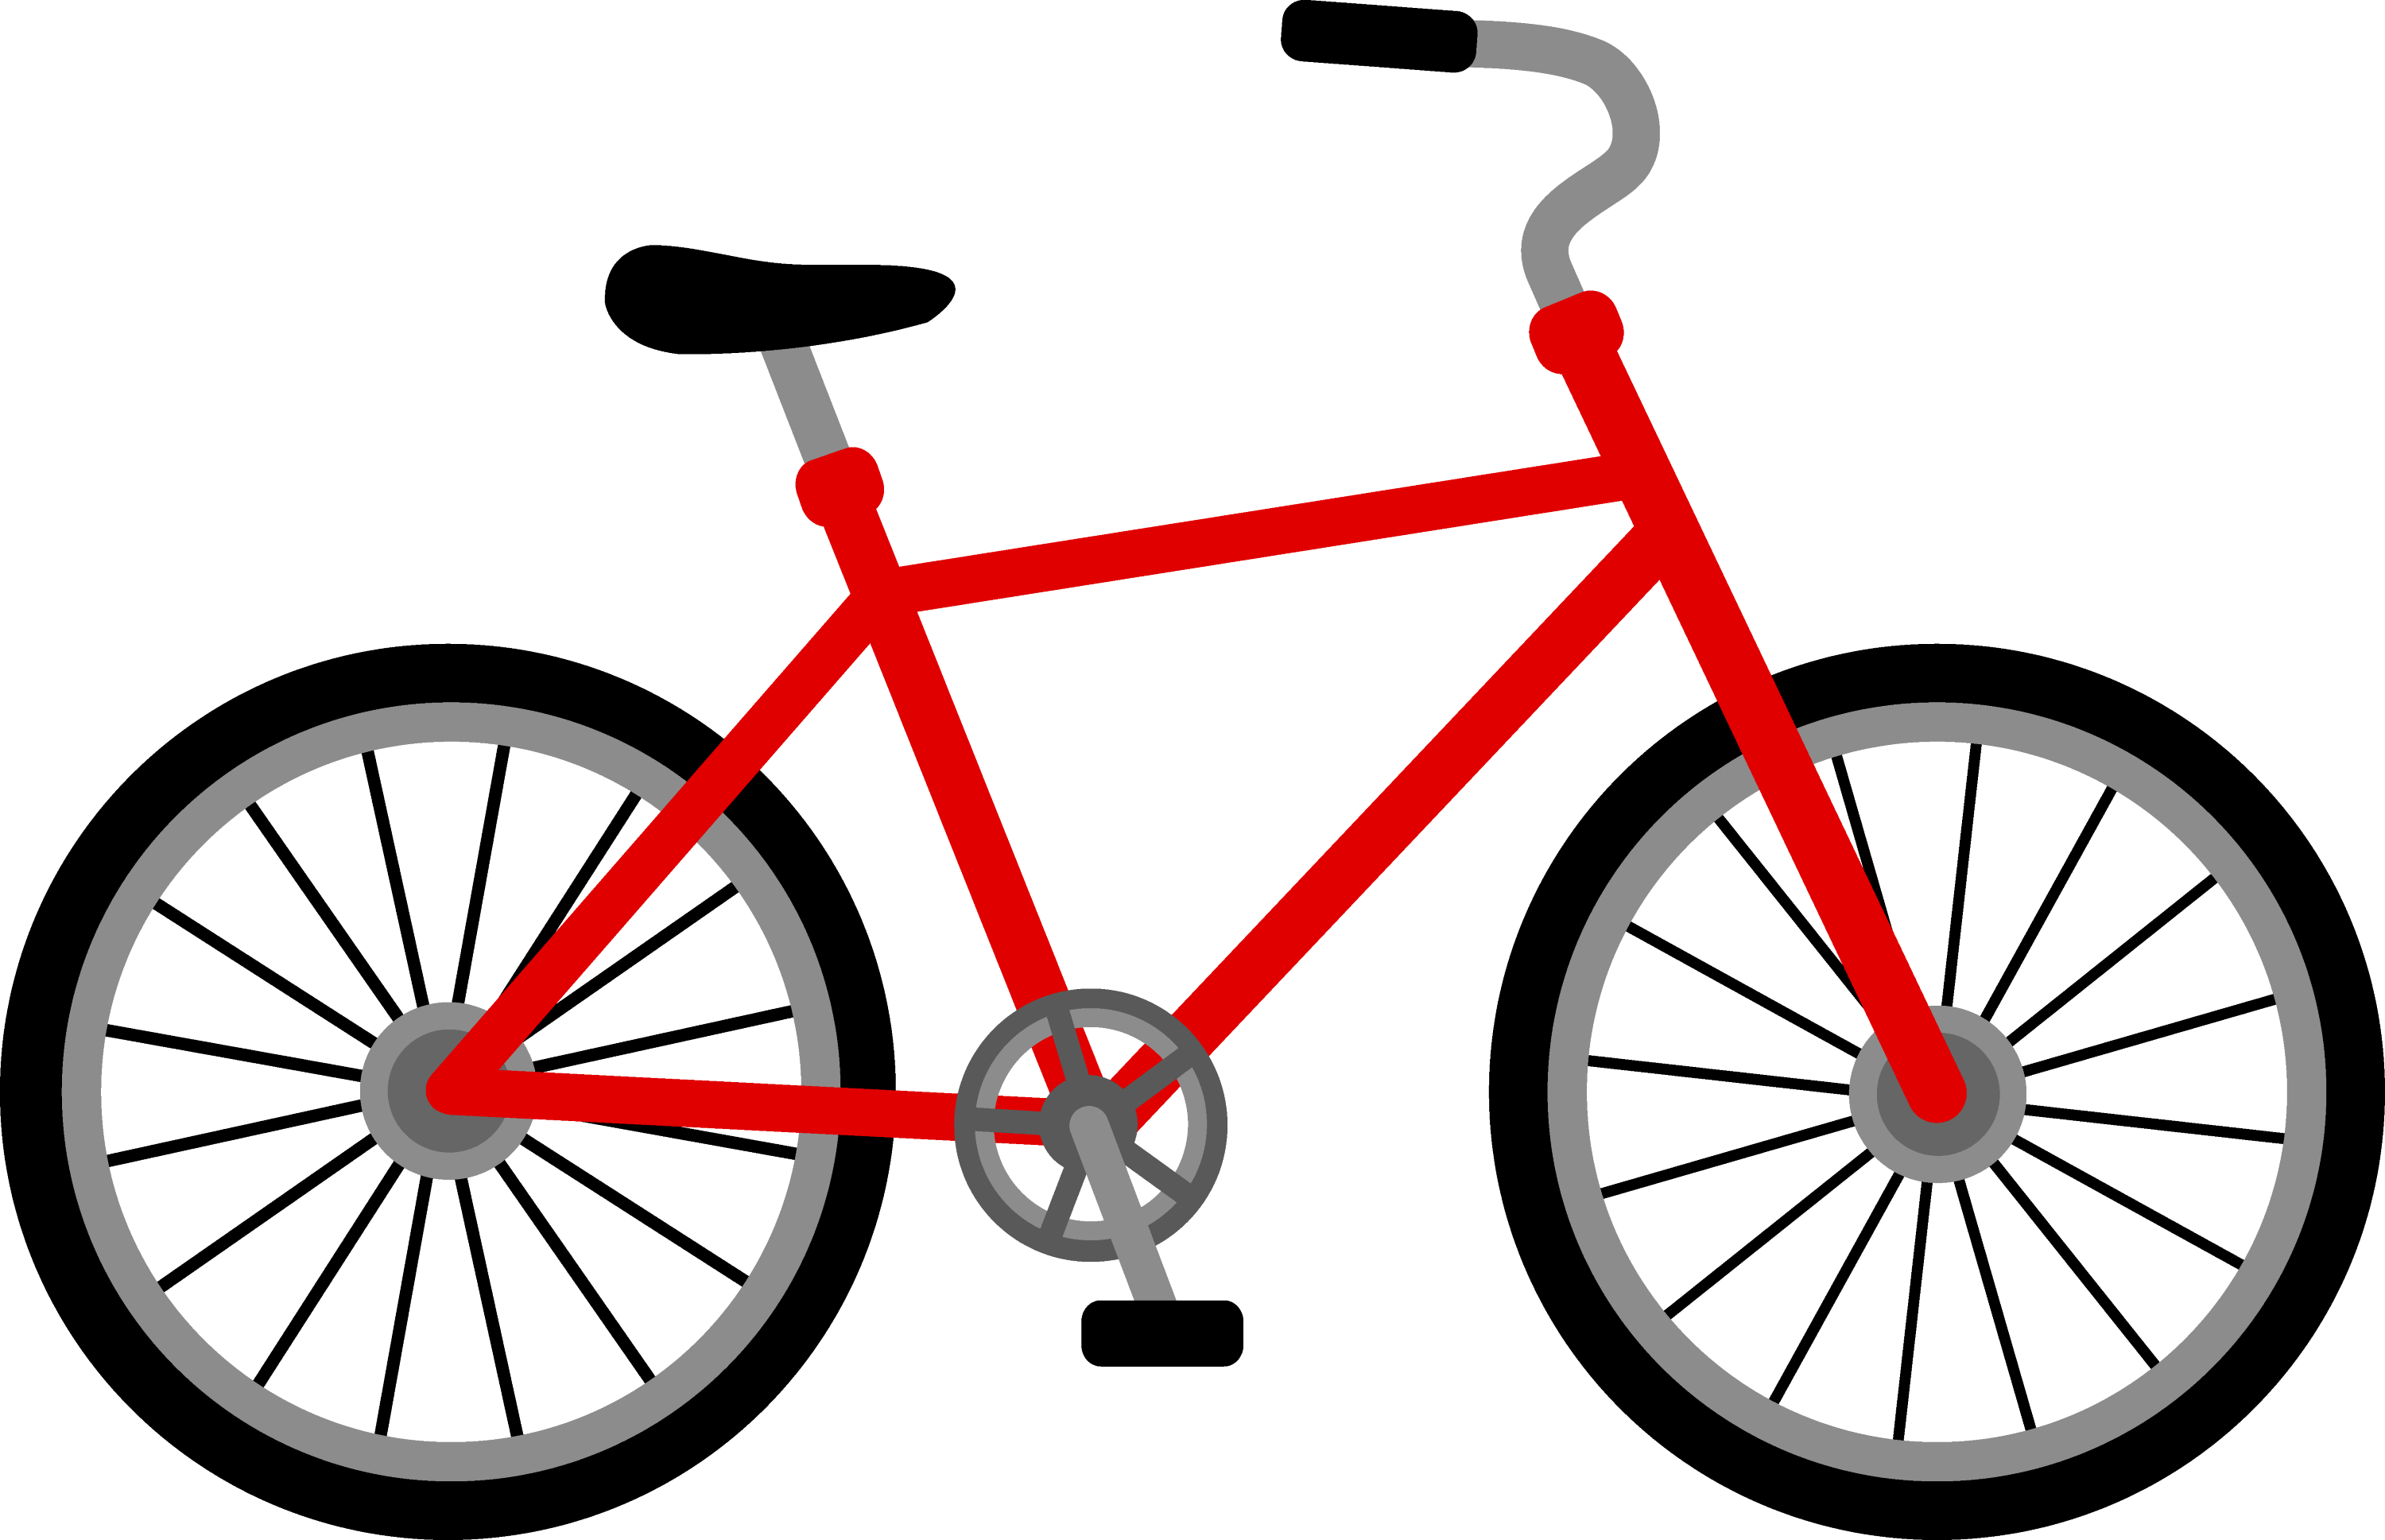 http://sweetclipart.com/multisite/sweetclipart/files/bike_red.png